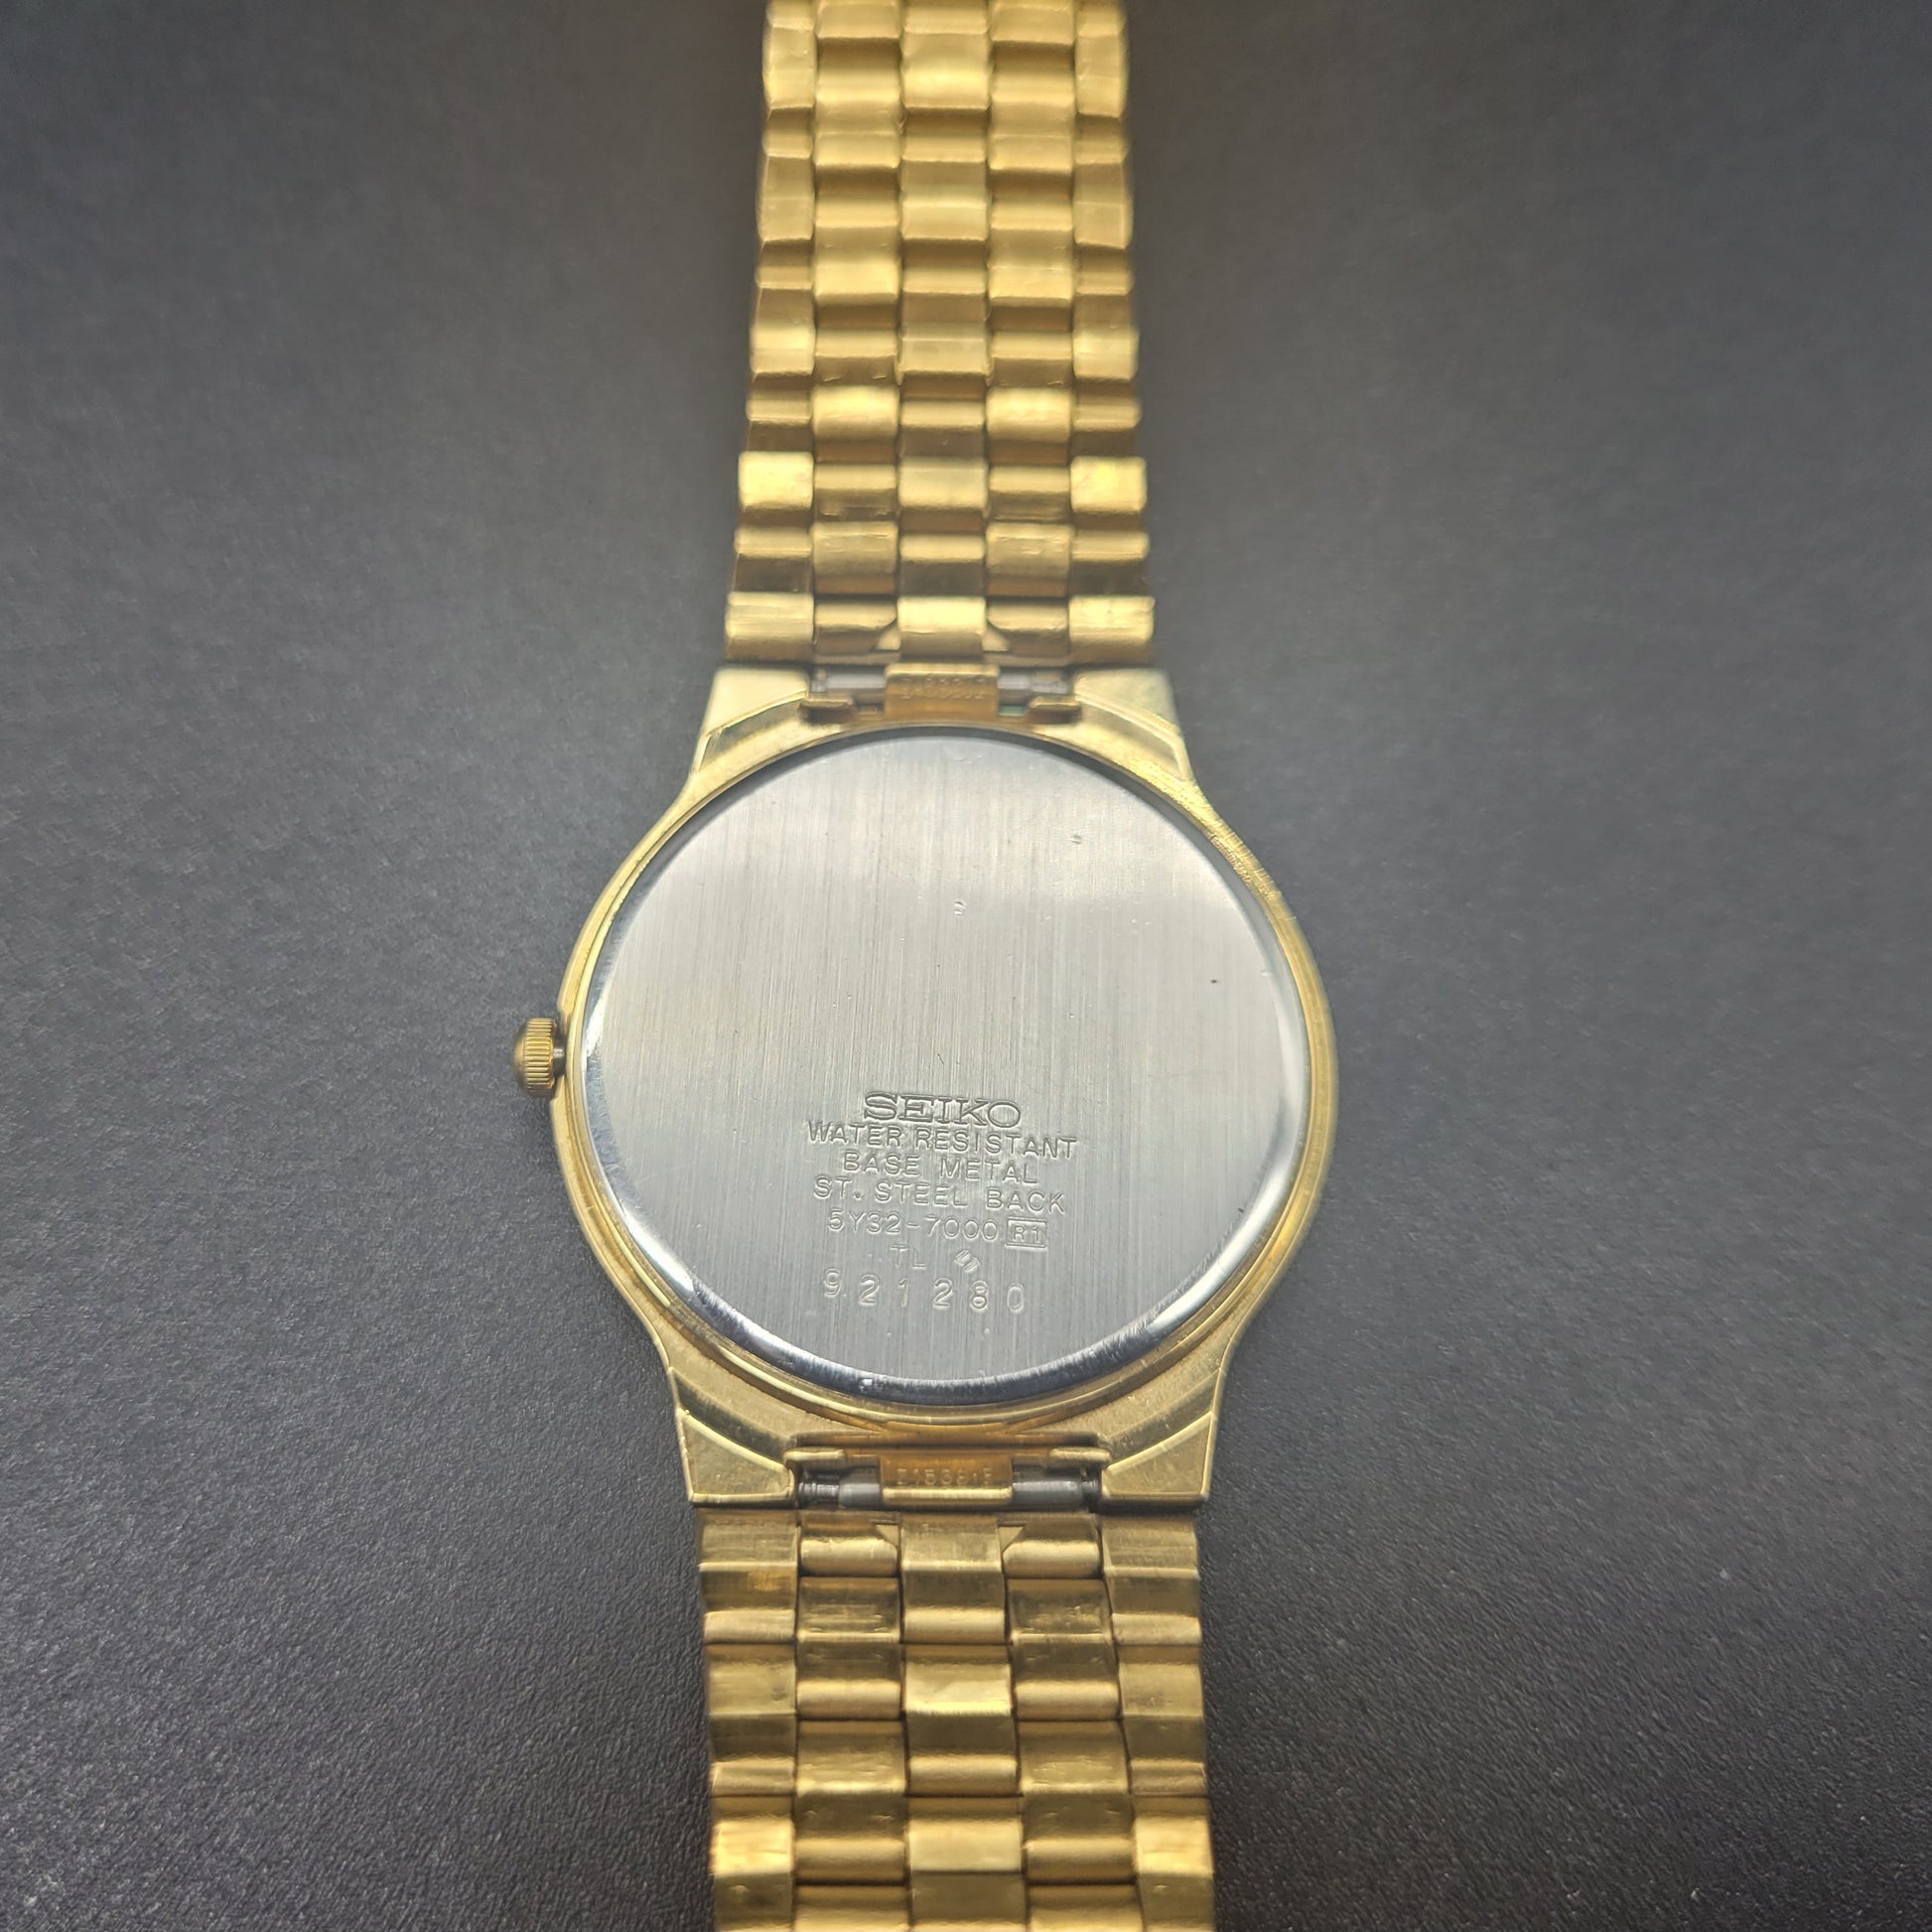 Vintage Seiko Gold Plated Watch Champagne Dial 36mm KBantiques.com watches 